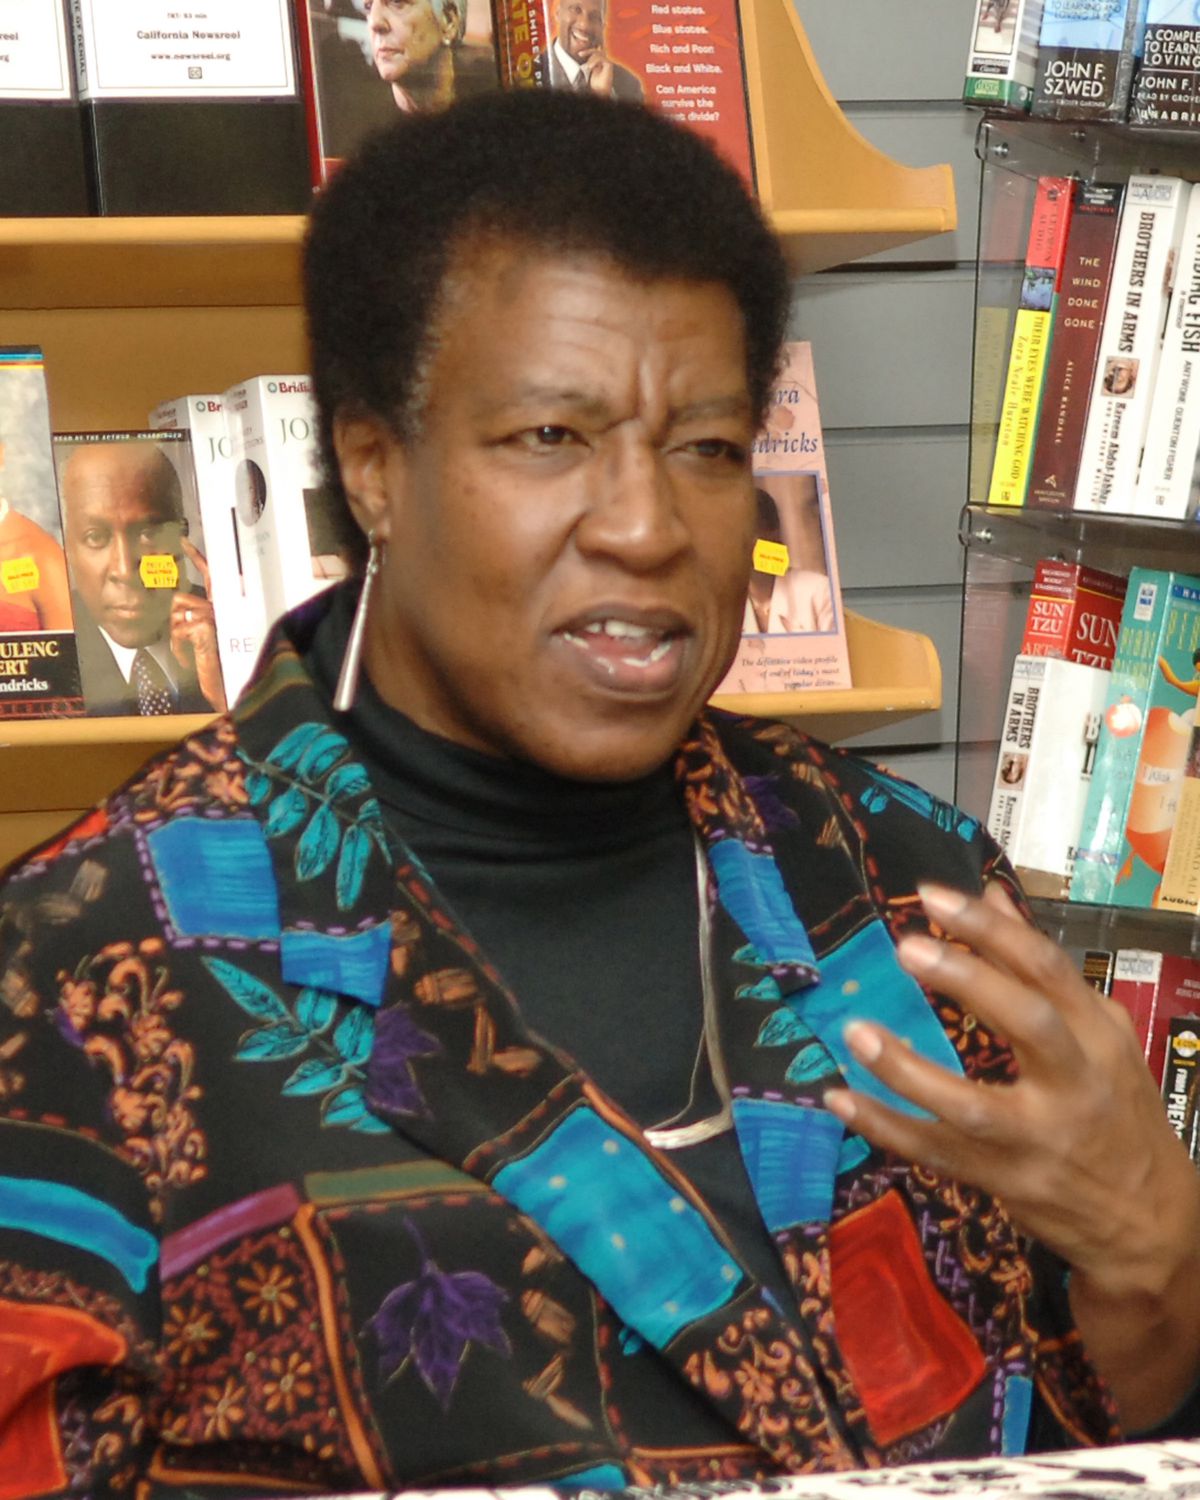 Octavia E. Butler in the 1990s, wearing a patterned shirt with tree leaf designs and long metal earrings, is caught mid-sentence during a reading at a book store